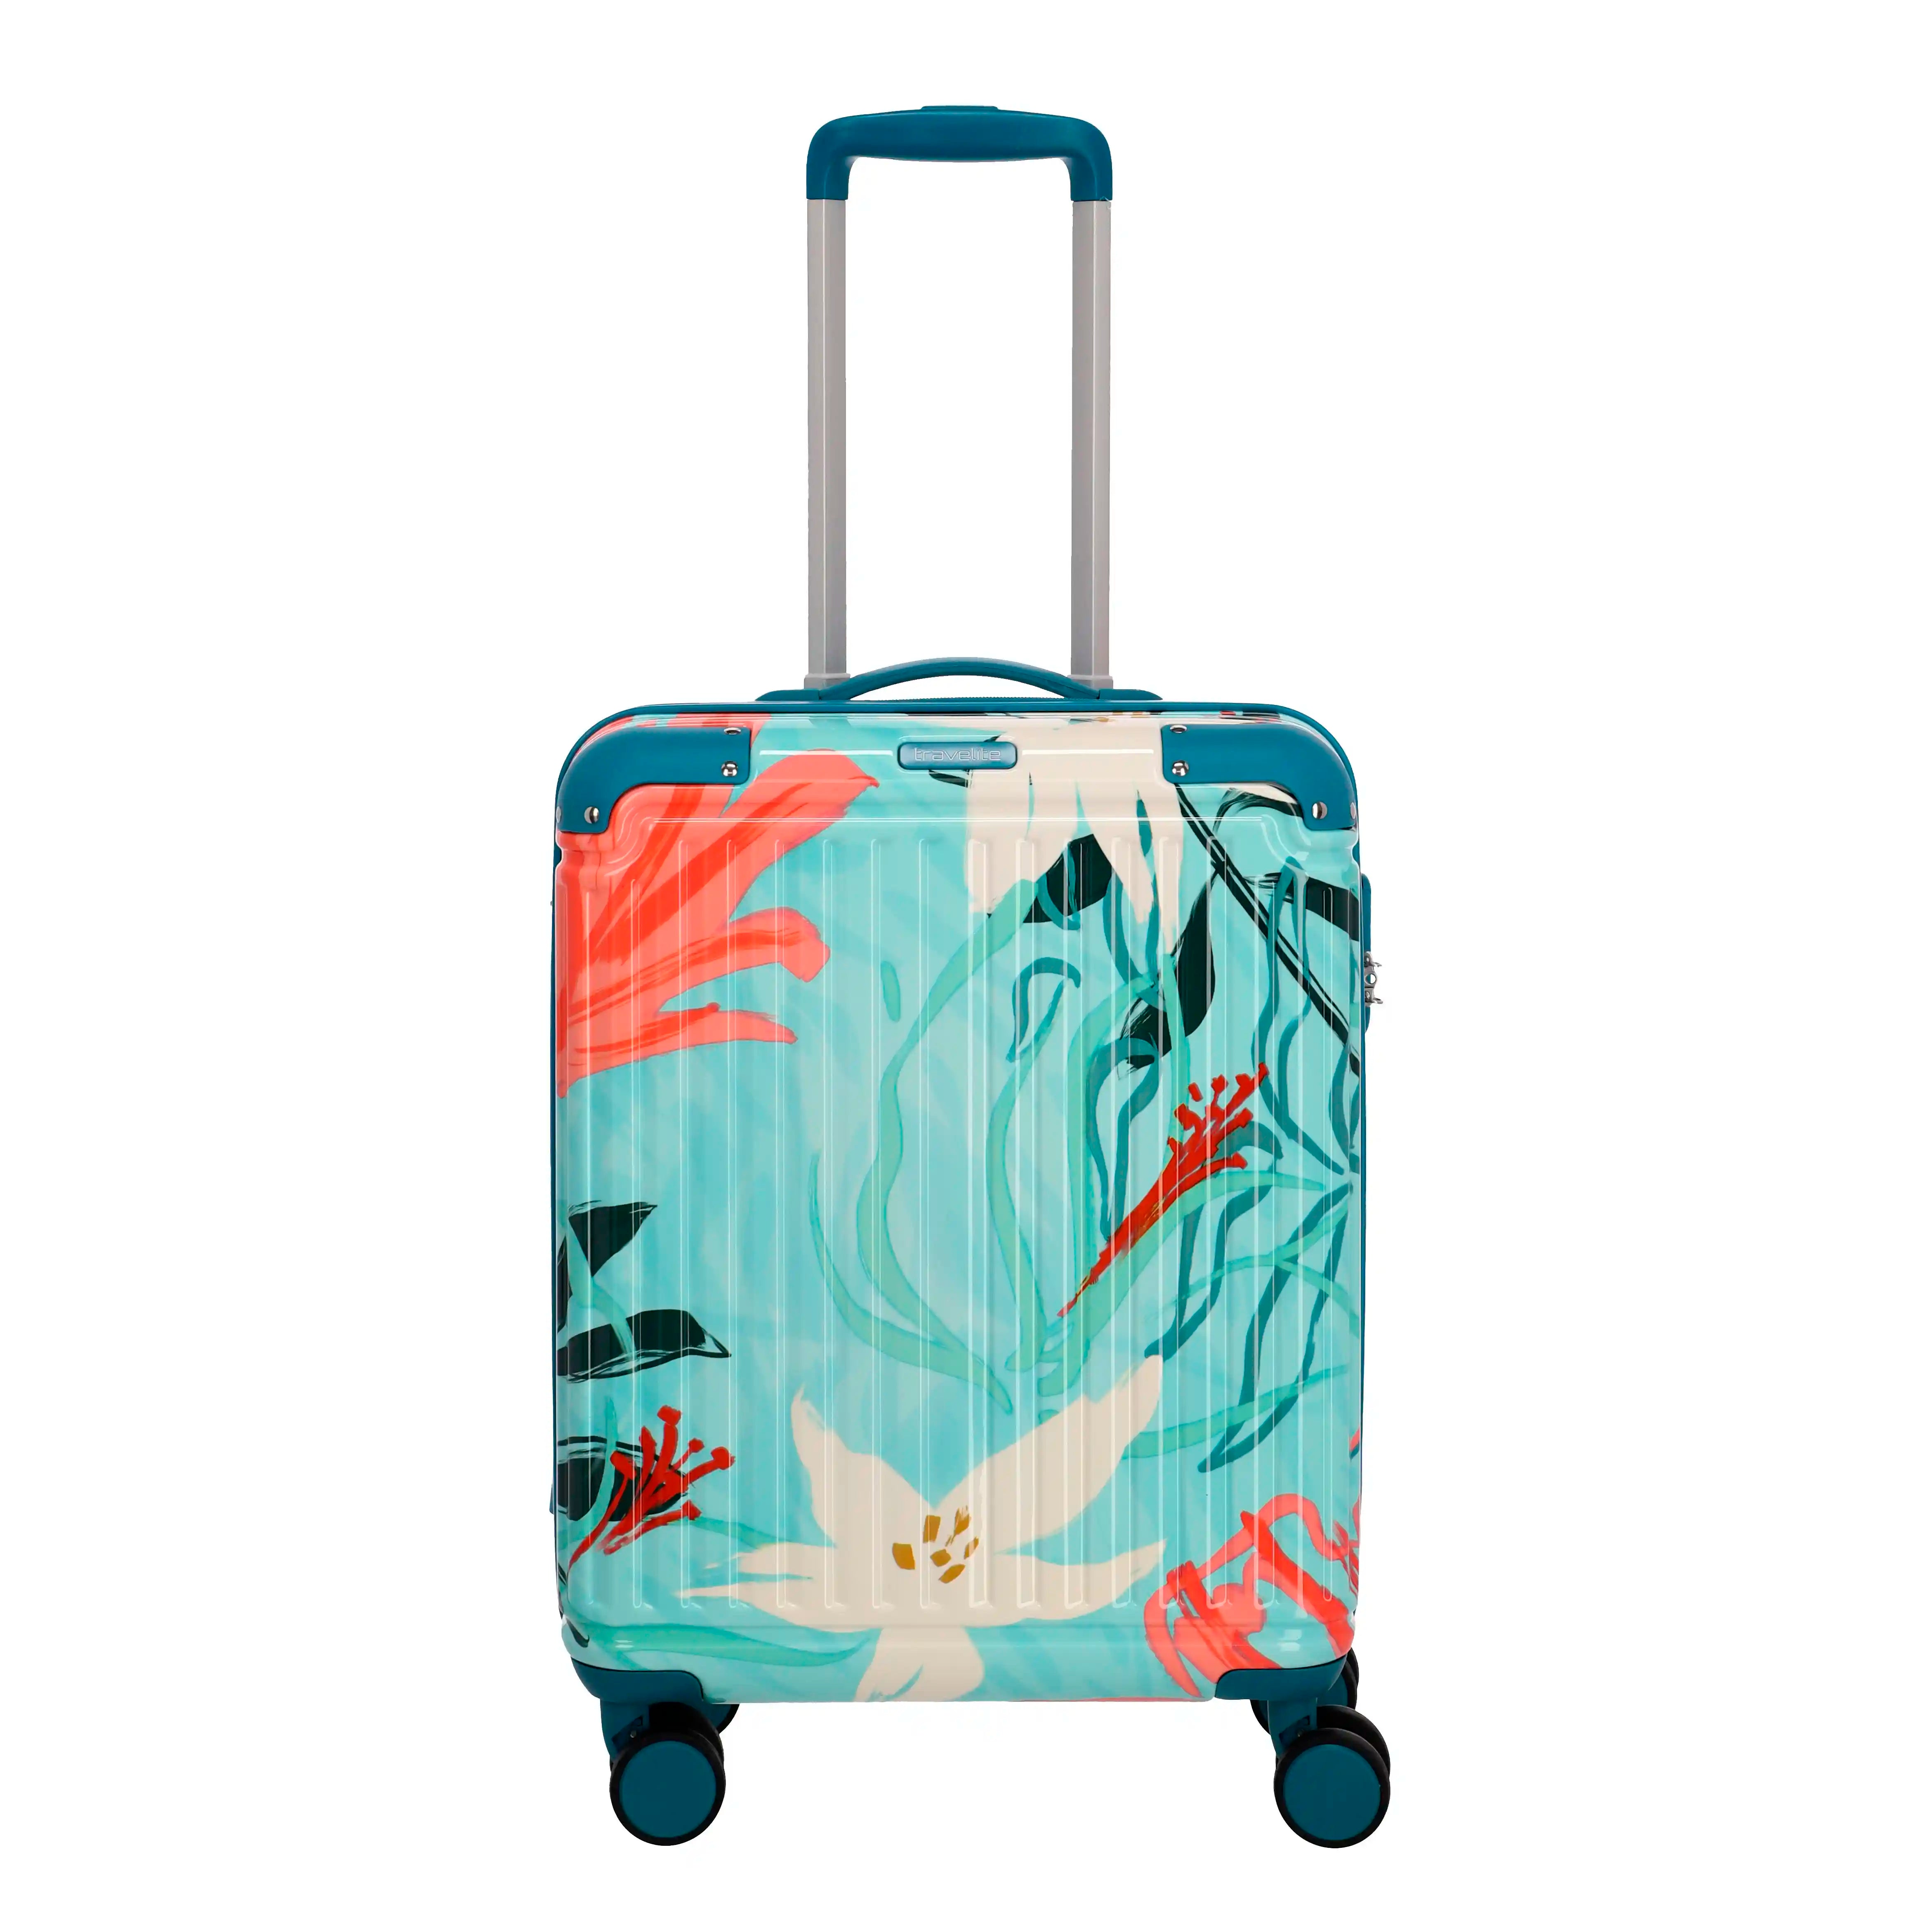 Travelite Cruise 4-wheel trolley 55 cm - Turquoise Lily